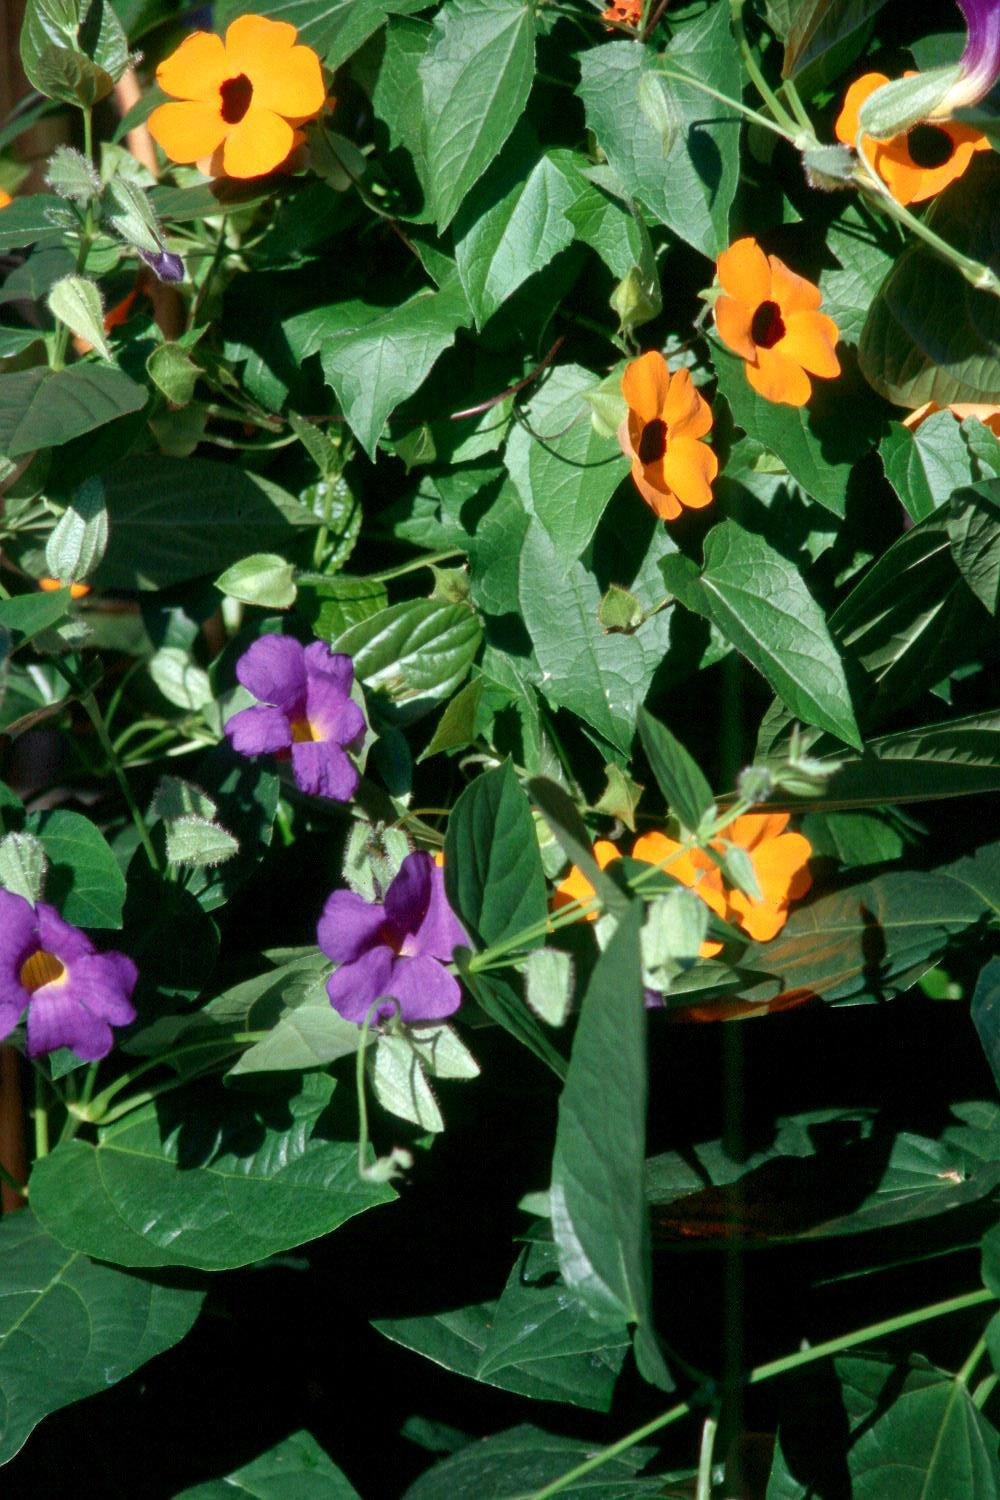 The Blue Glory offers the perfect complement for the Sunny Orange Wonder black-eyed Susan vine.